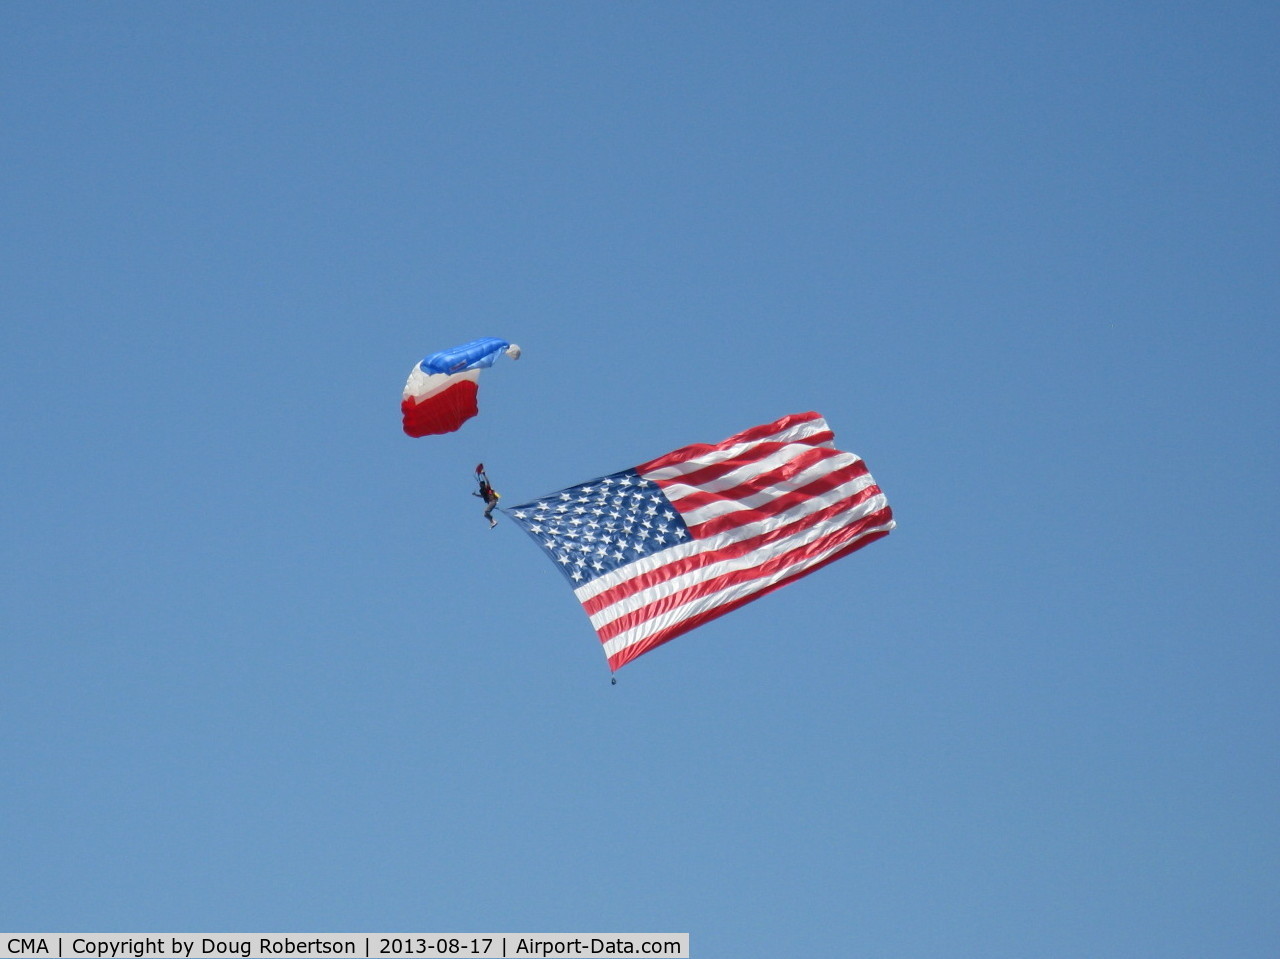 Camarillo Airport (CMA) - Parachute jumper opening Wings Over Camarillo Airshow 2013 with OLD GLORY